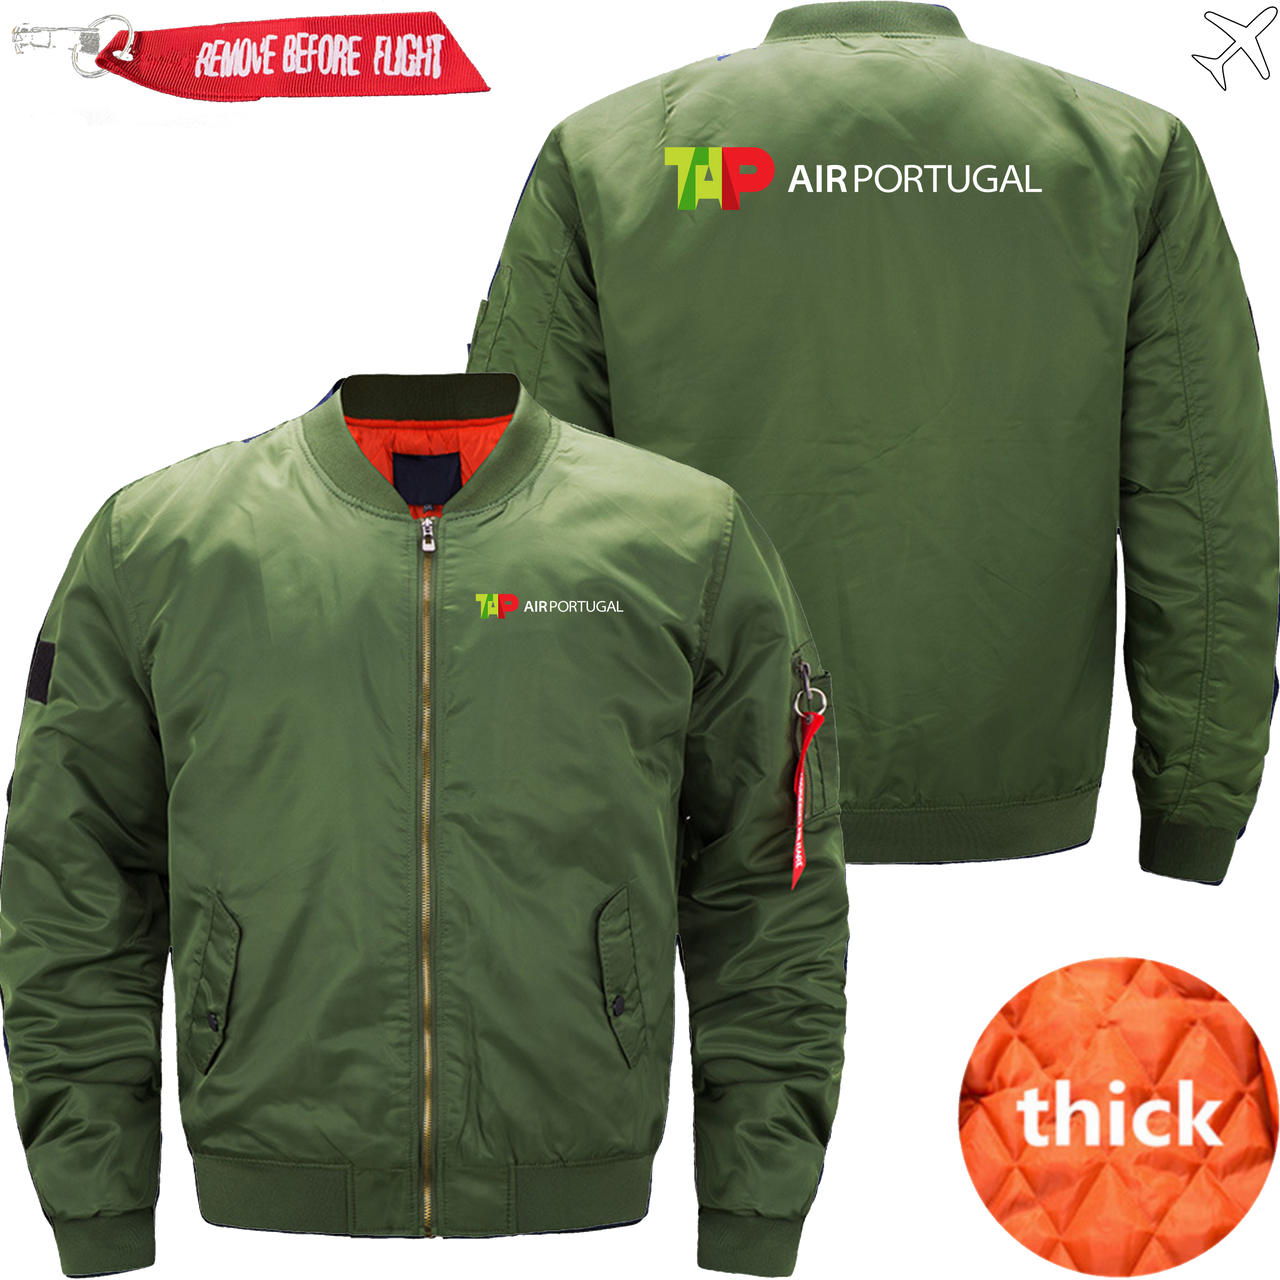 PORTUGAL AIRLINES MA1 JACKET THE AV8R